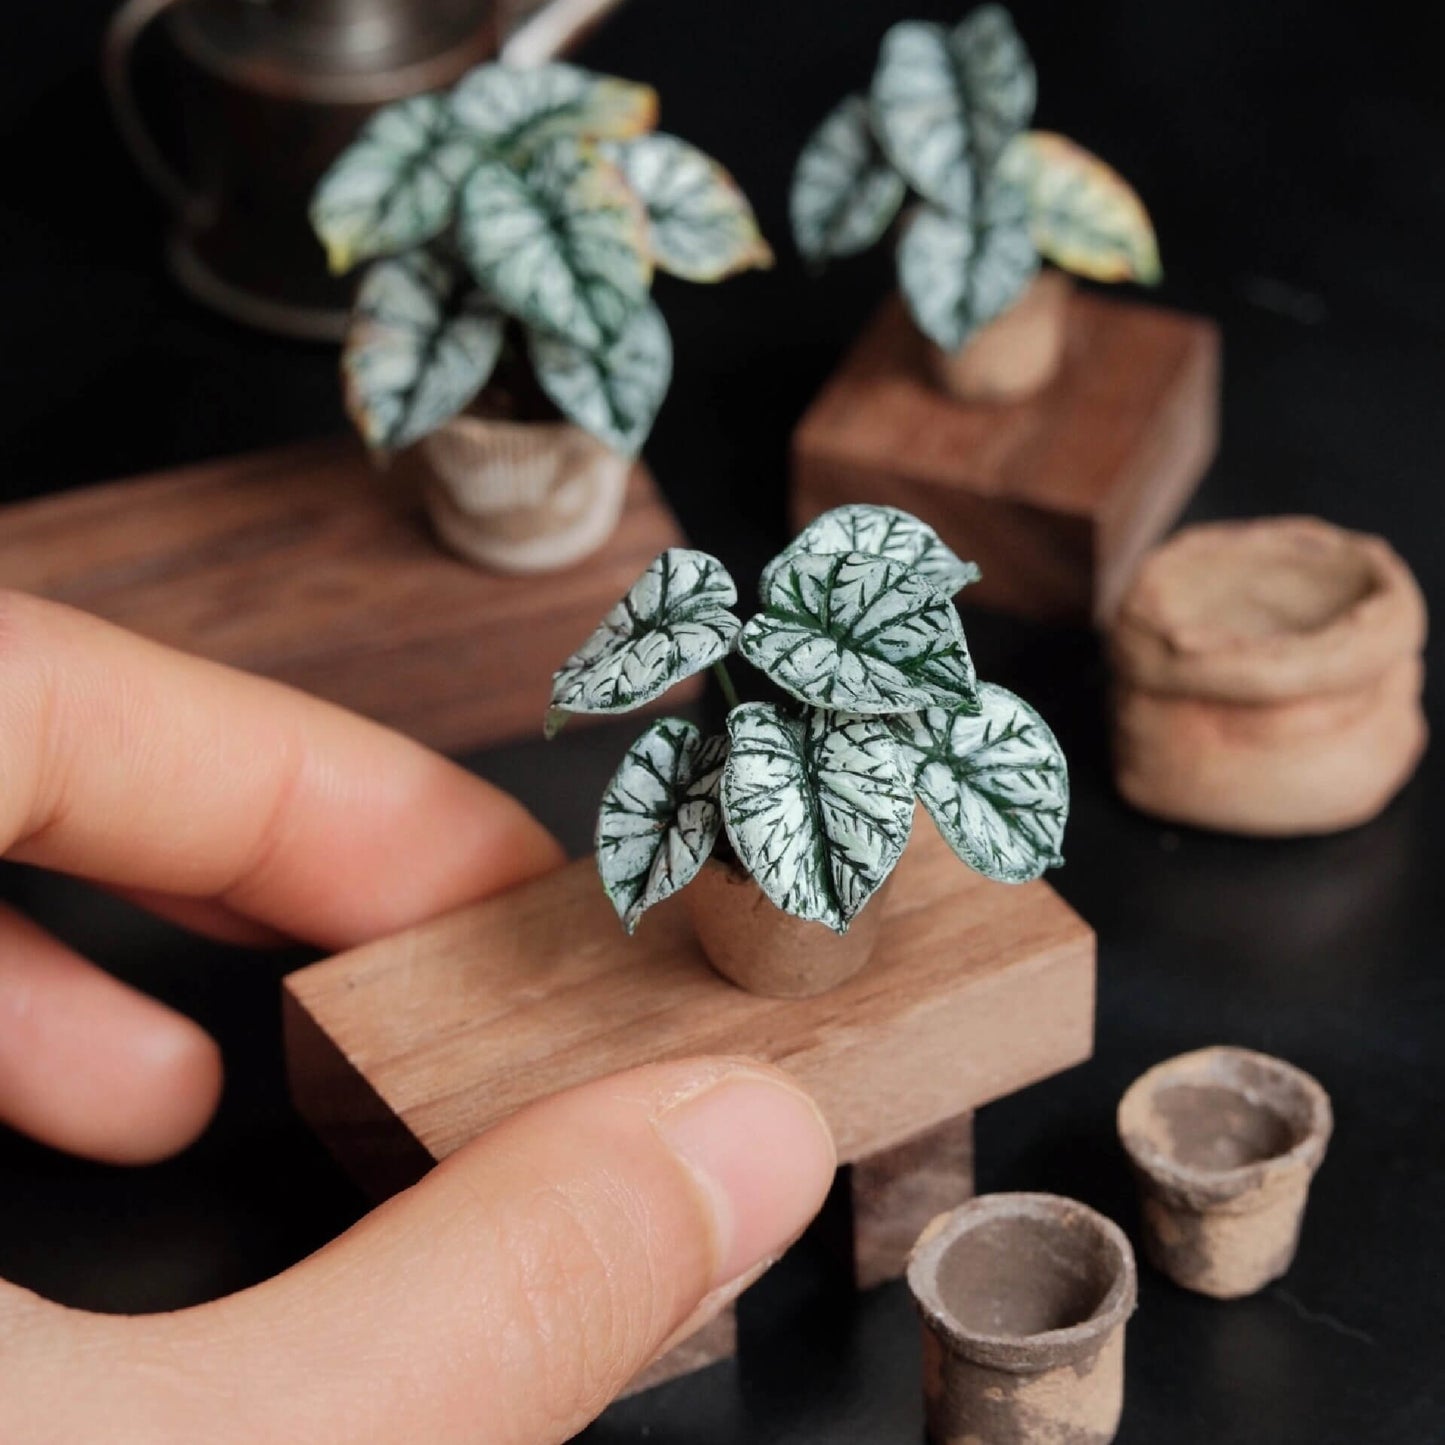 Alocasia baginda Silver Dragon is highly sought after for its dark, leathery, silver-green leaves with deep emerald green veins. Scale: 1:6; 1:12 Material: Handmade from Clay